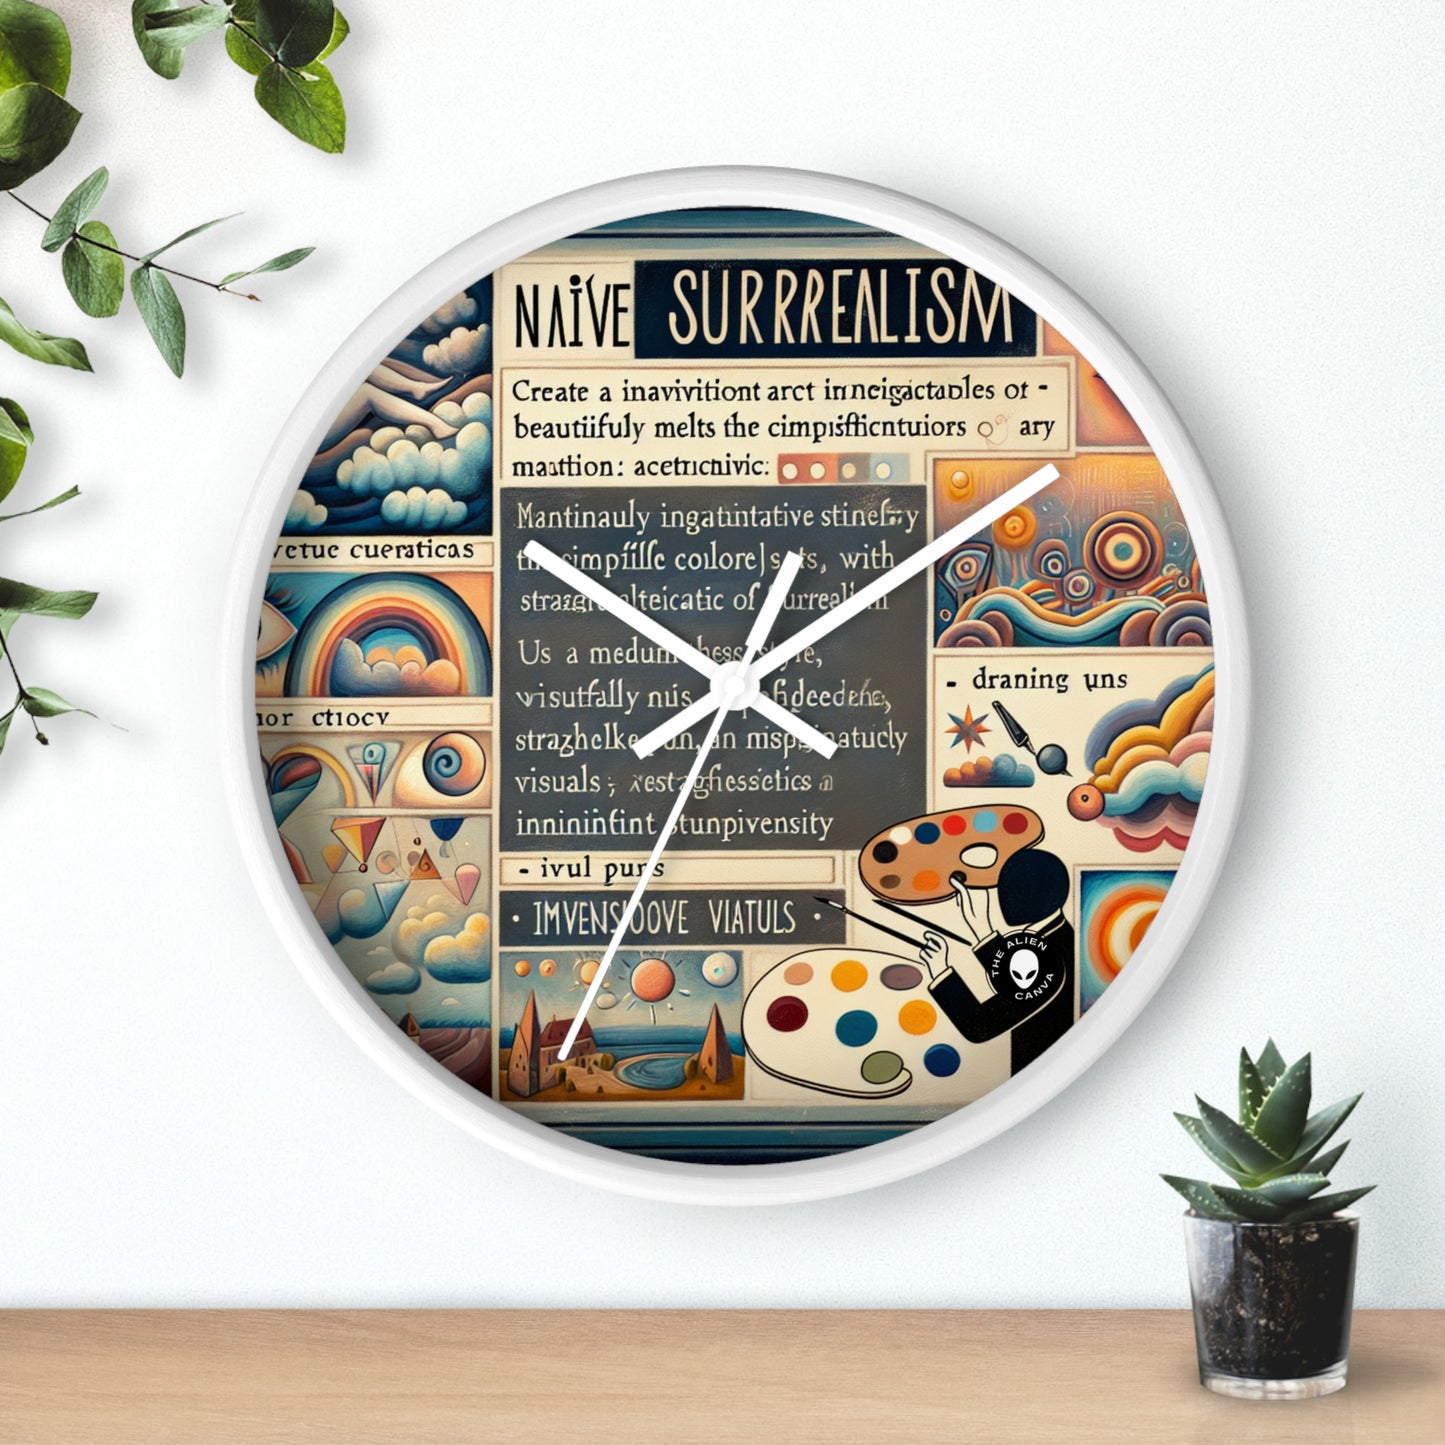 "Magical Tea Time: The Whimsical Transformation of a Teapot" - The Alien Wall Clock Naïve Surrealism